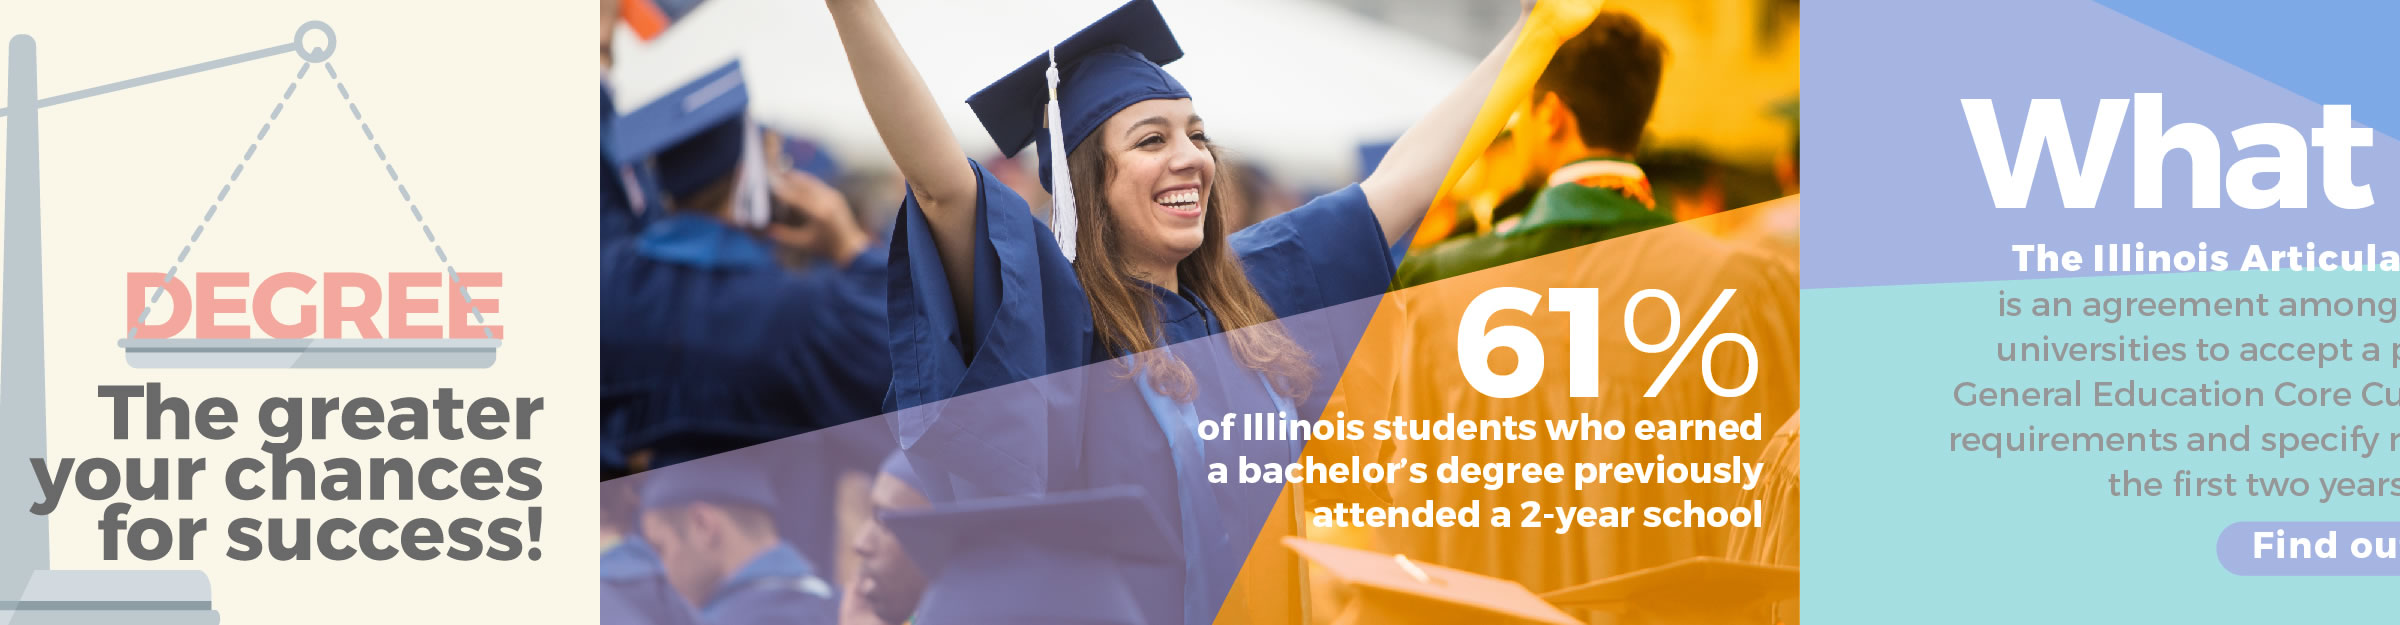 61% of Illinois students who earned a bachelor's degree previously attended a 2-year school